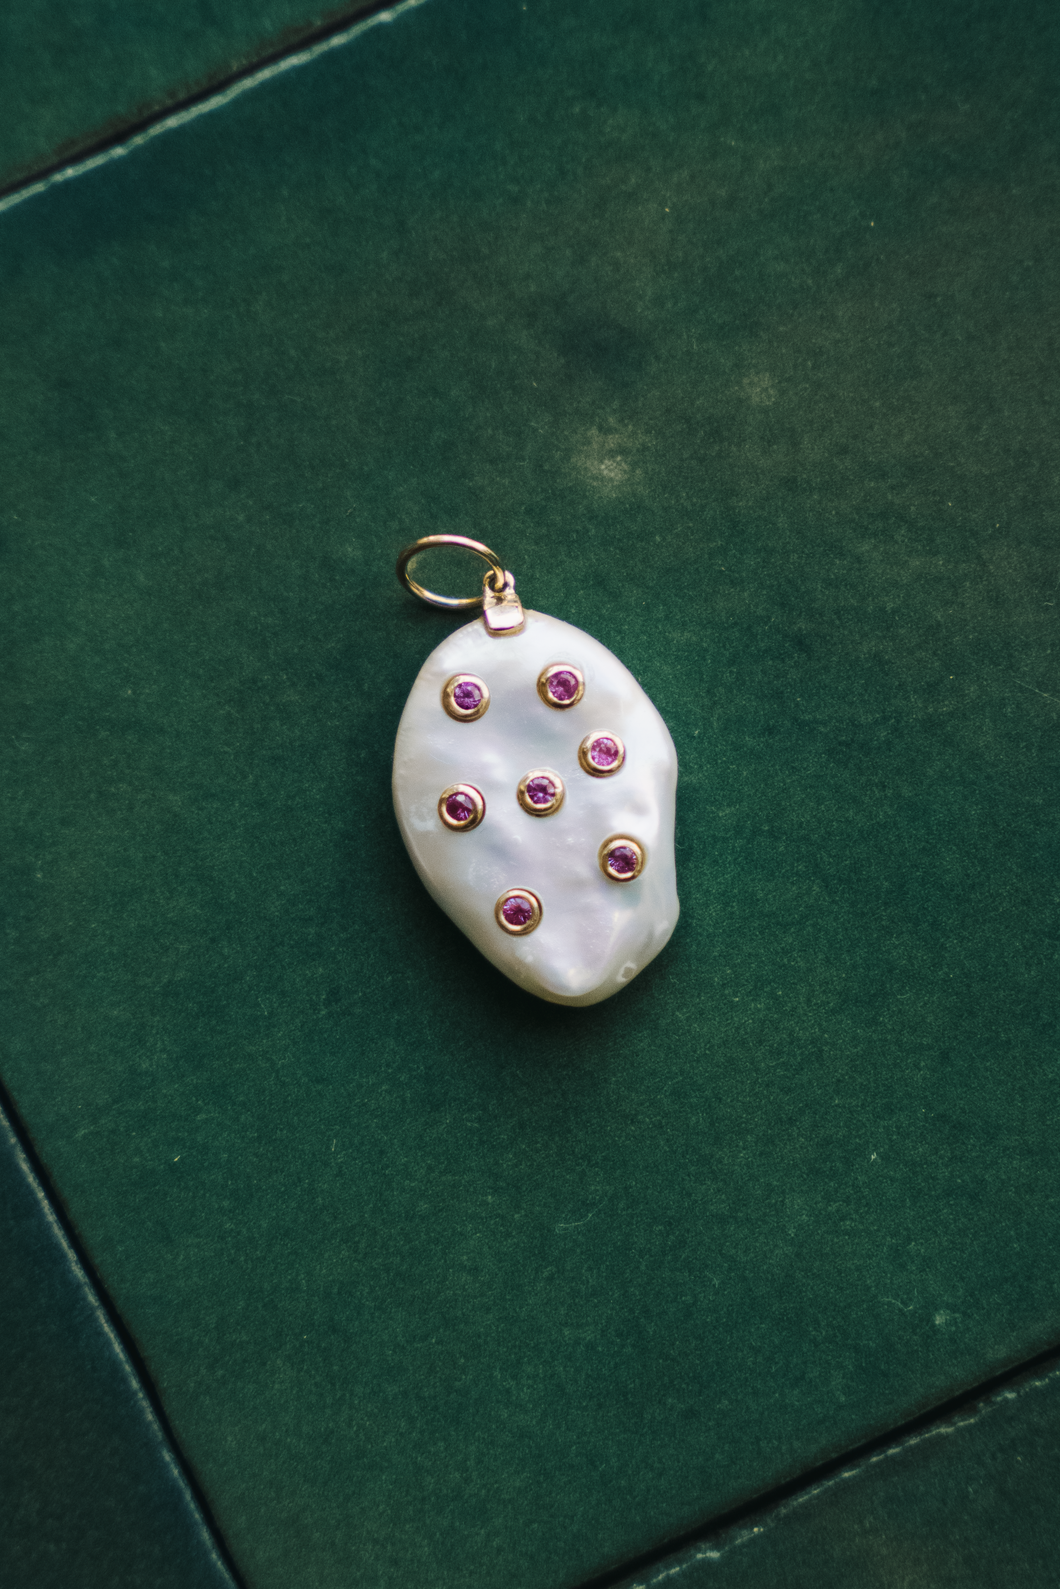 14K GOLD CHARM, MOTHER OF PEARL WITH PINK RUBIES